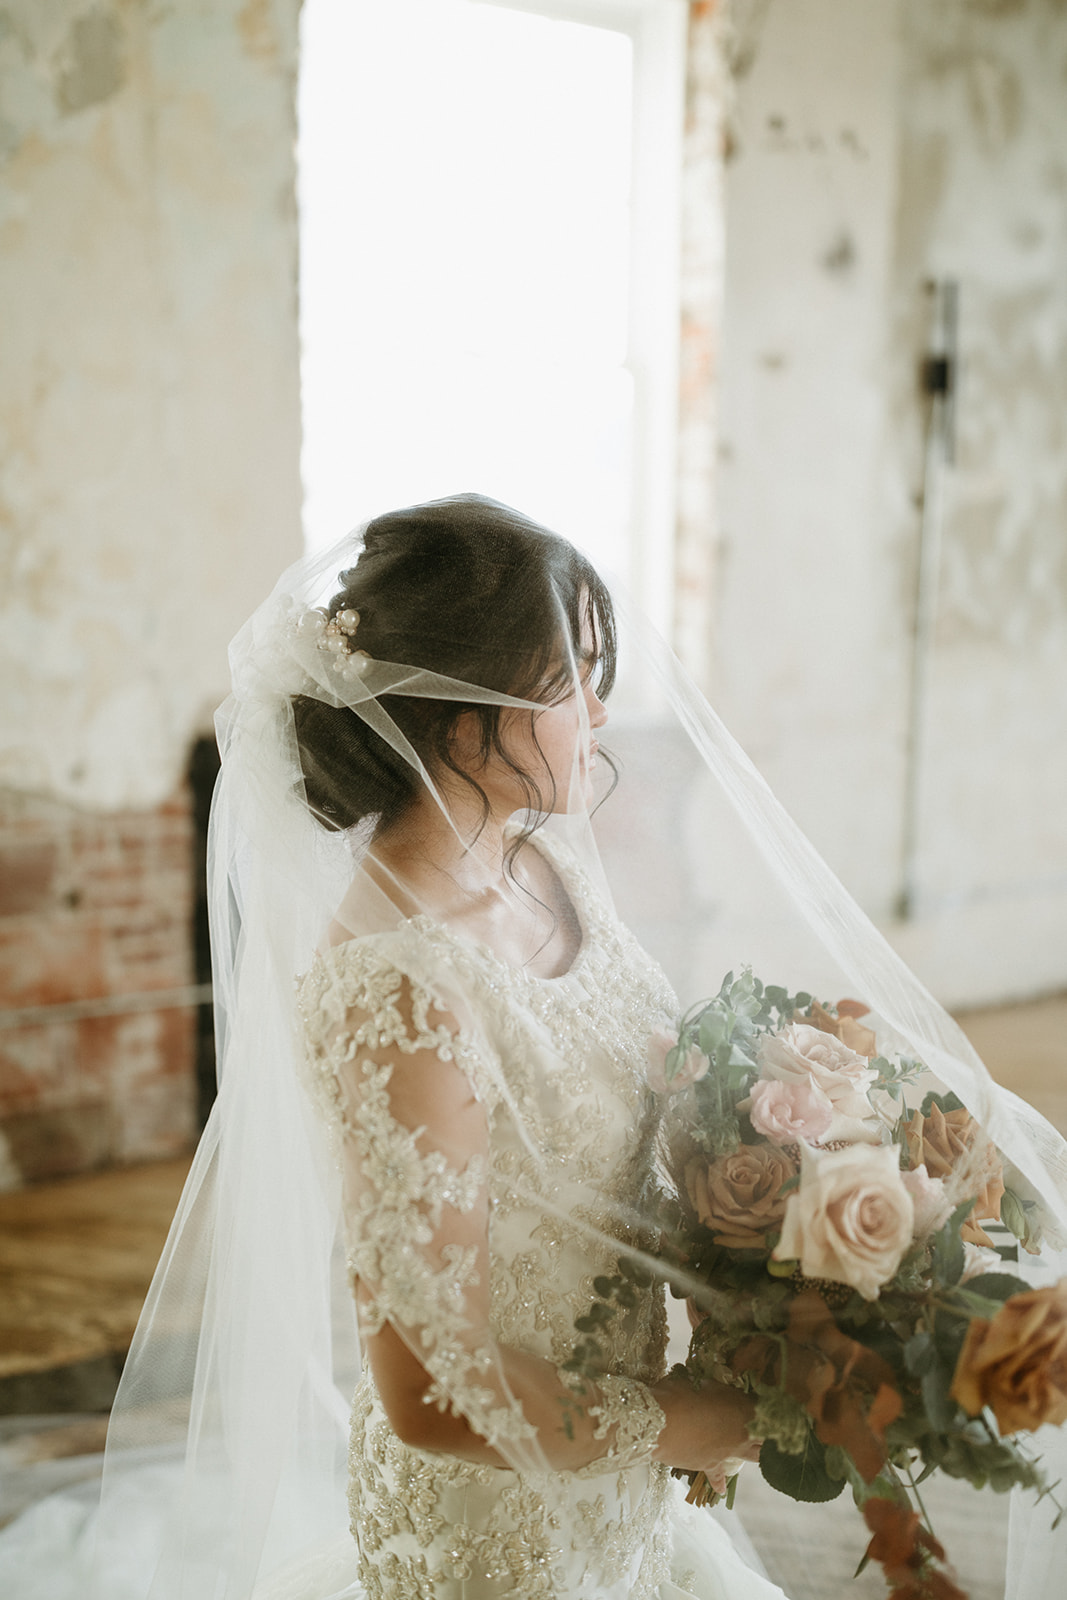 Bridal portraits with viel and lace gown